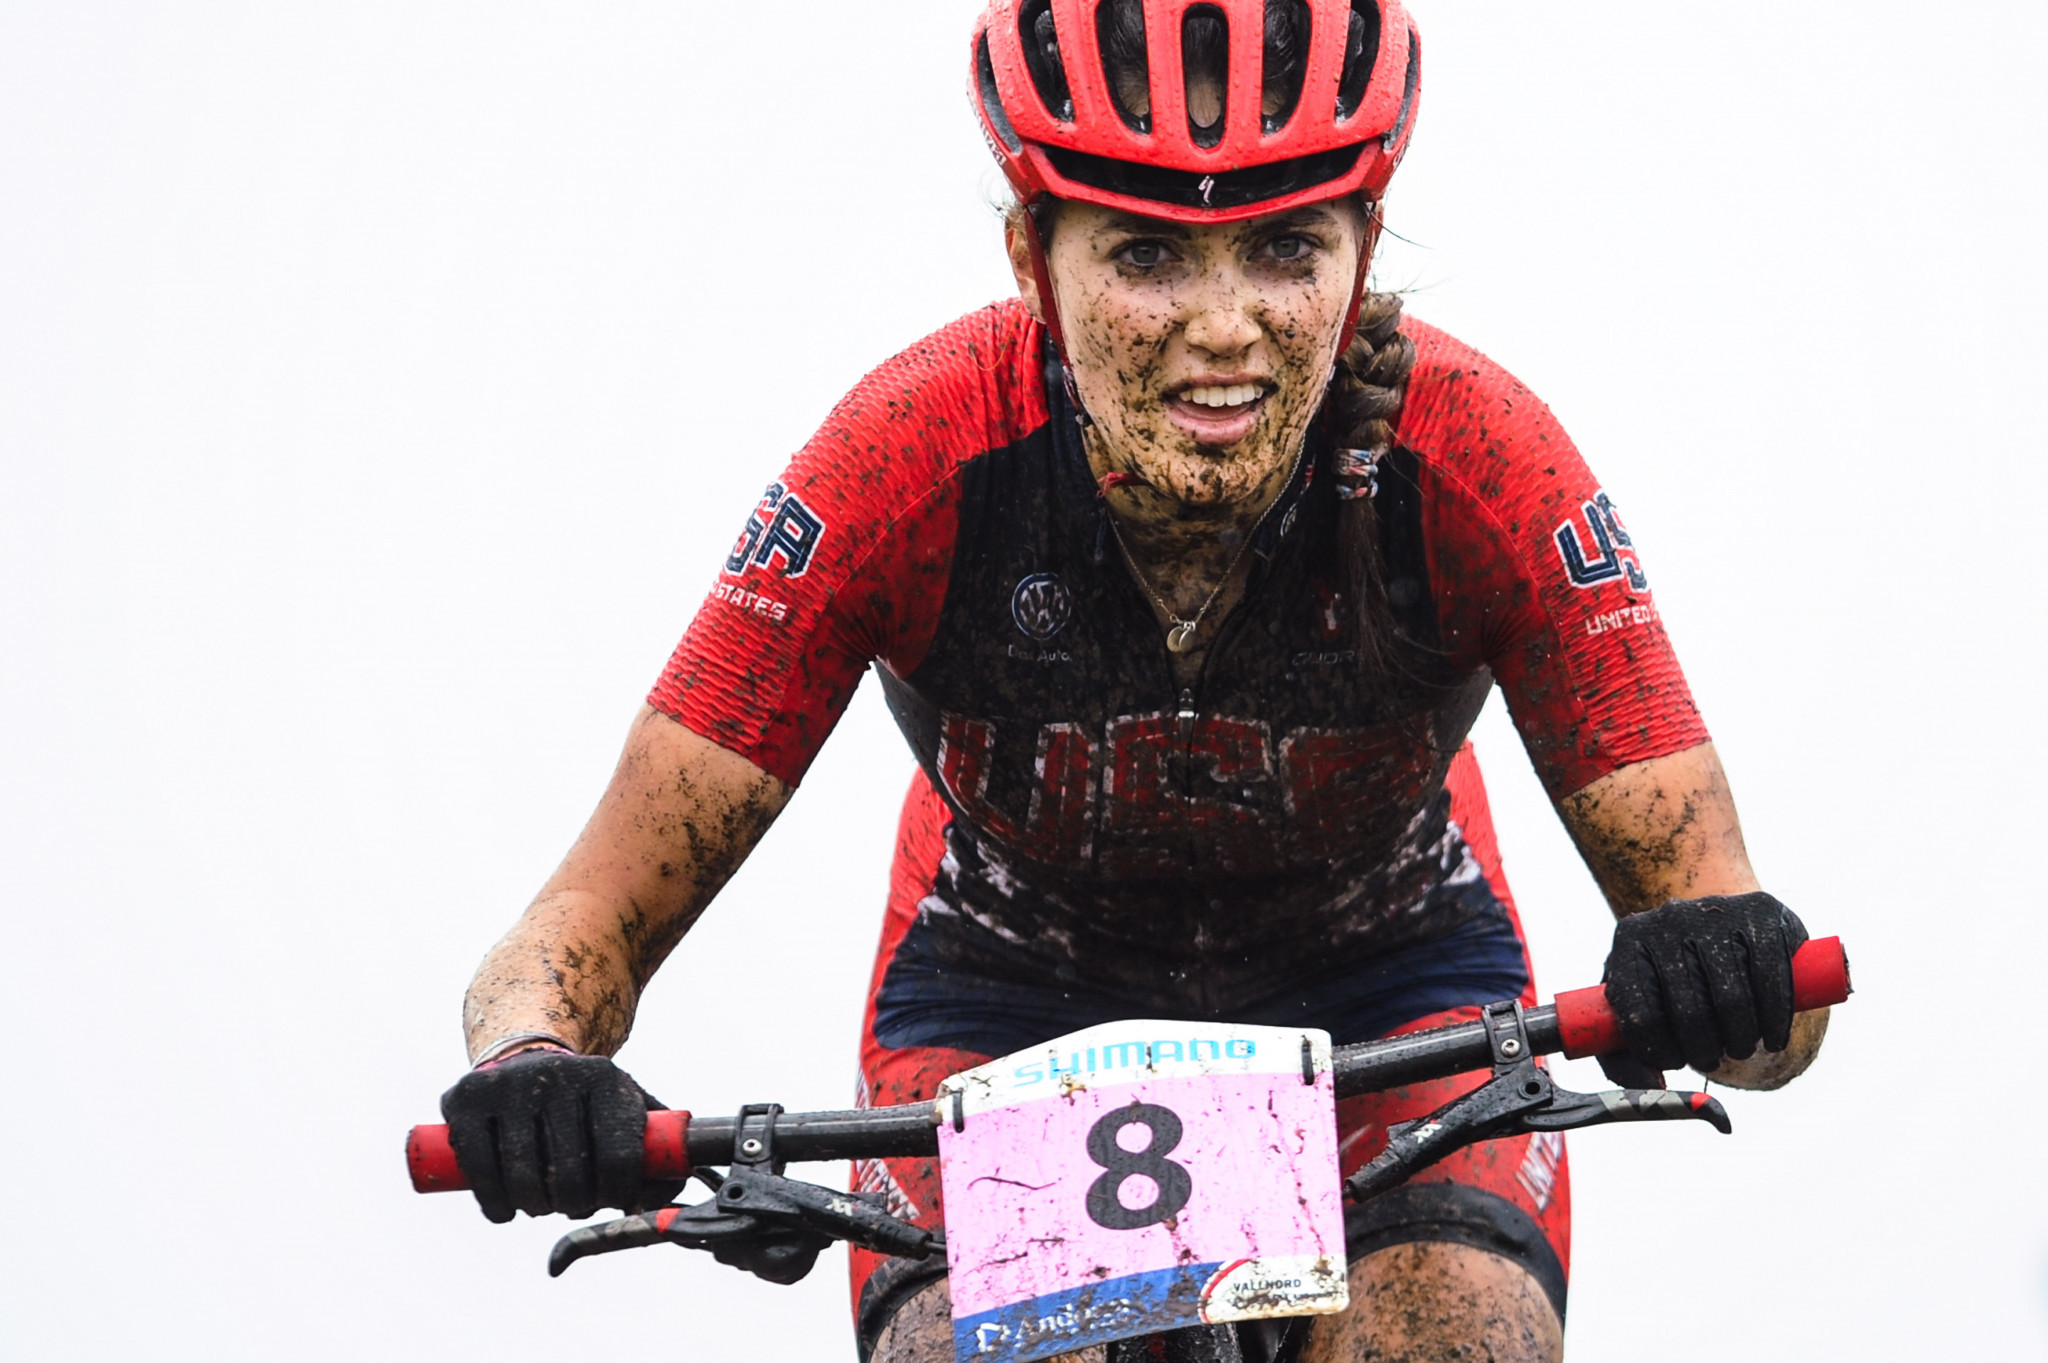 Courtney and Flückiger clinch cross-country victories at UCI Mountain Bike World Cup